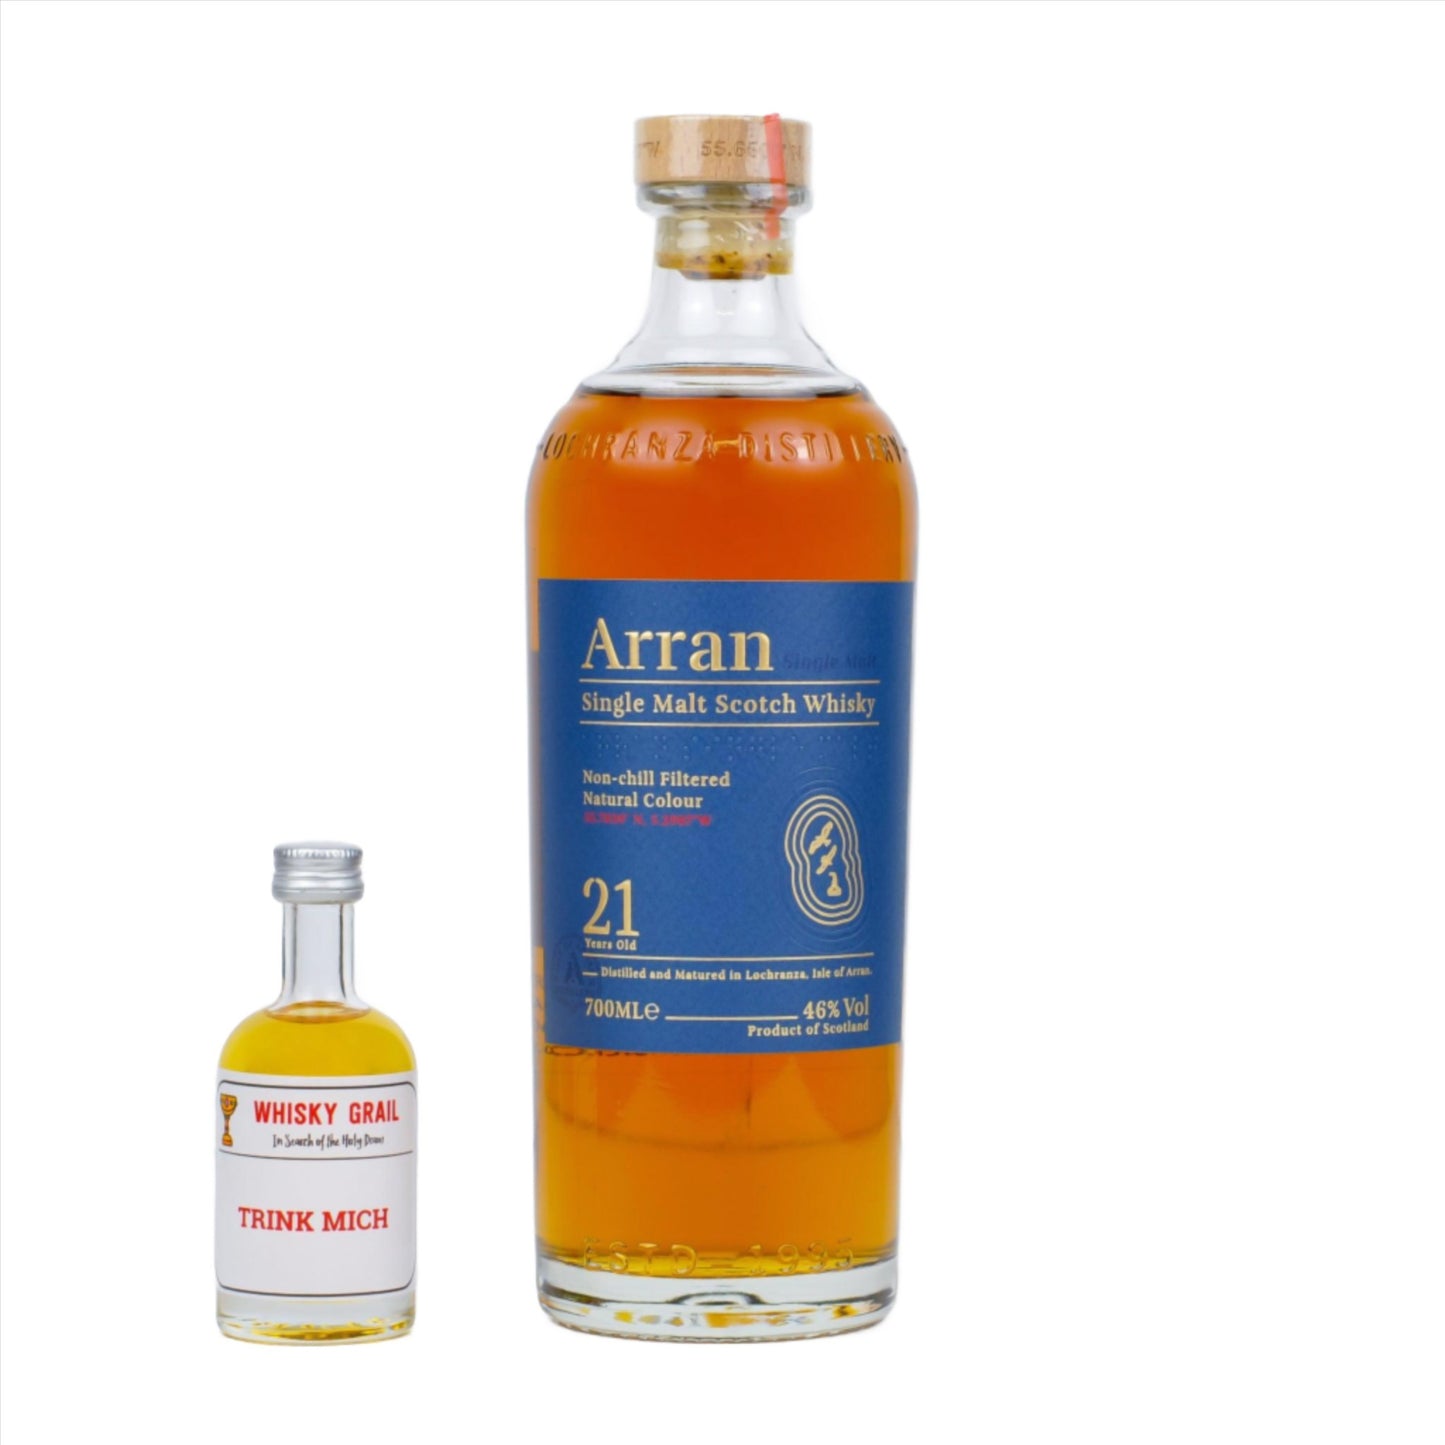 Arran 21 Years Old - Whisky Grail